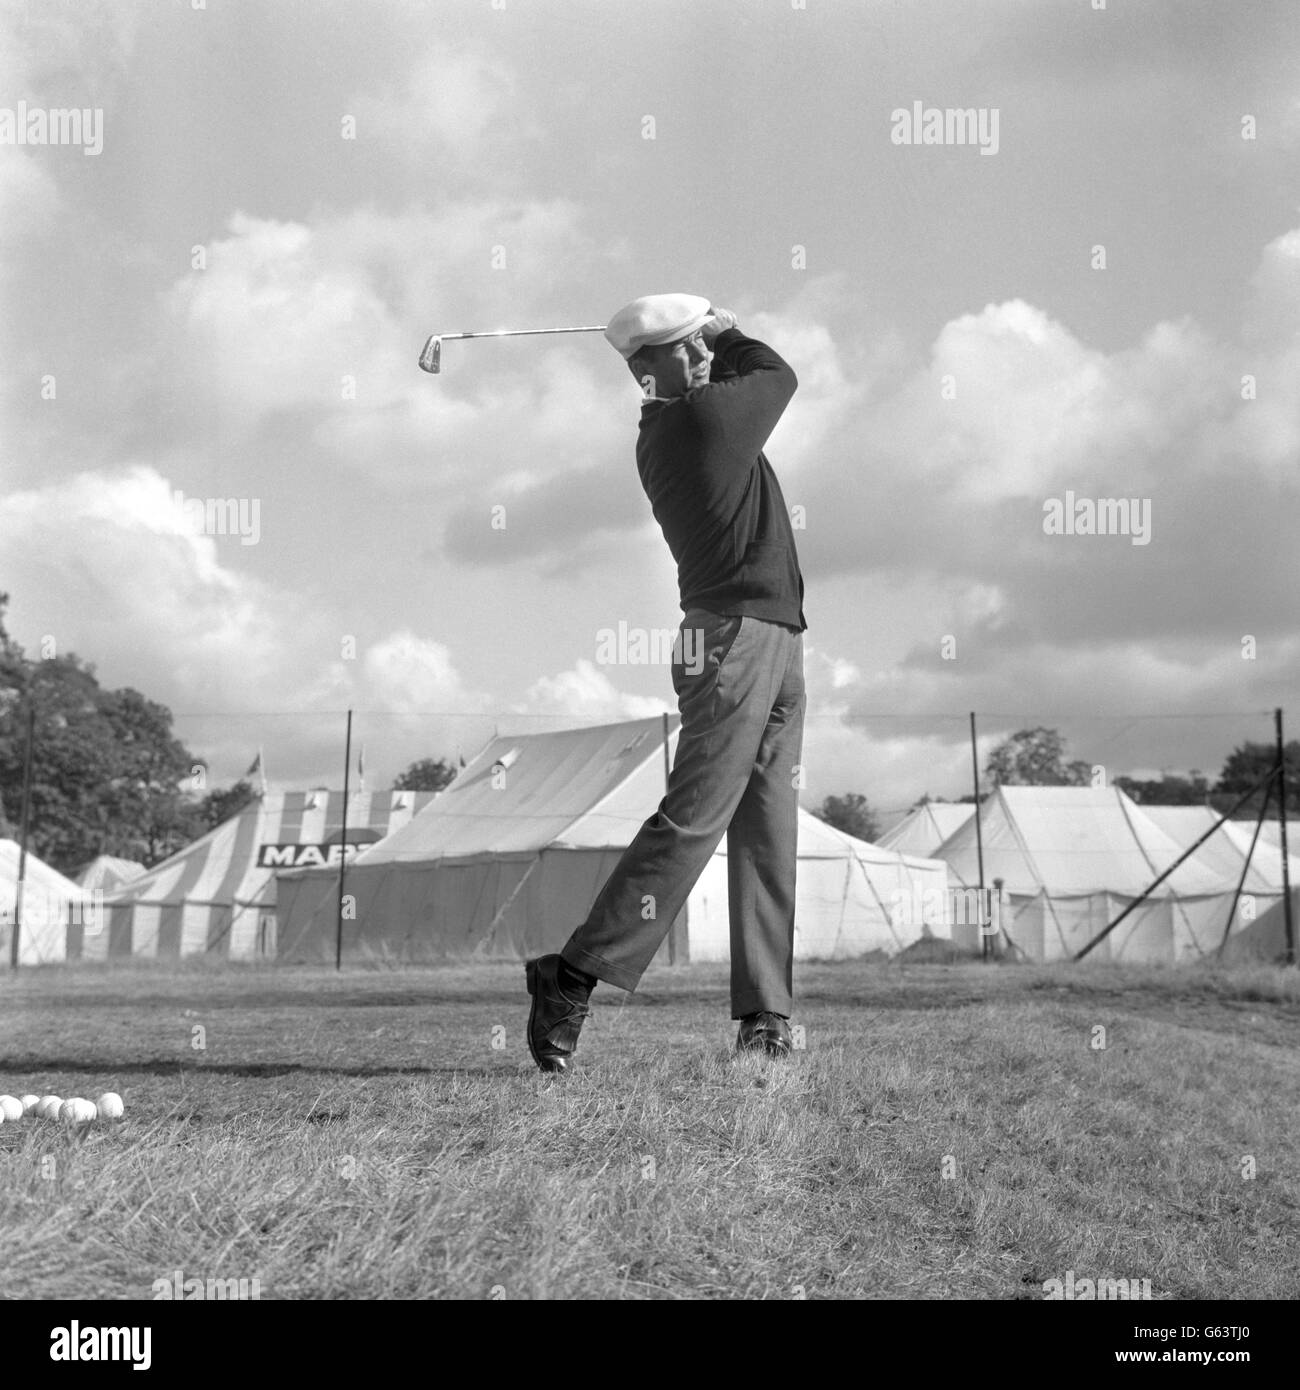 Ken Venturi, a former US Open champion, in practice ahead of representing the United States in the Ryder Cup match against Britain taking place at Royal Birkdale from October 7 to 9 (1965). Venturi will be making his first appearance in the contest. Stock Photo